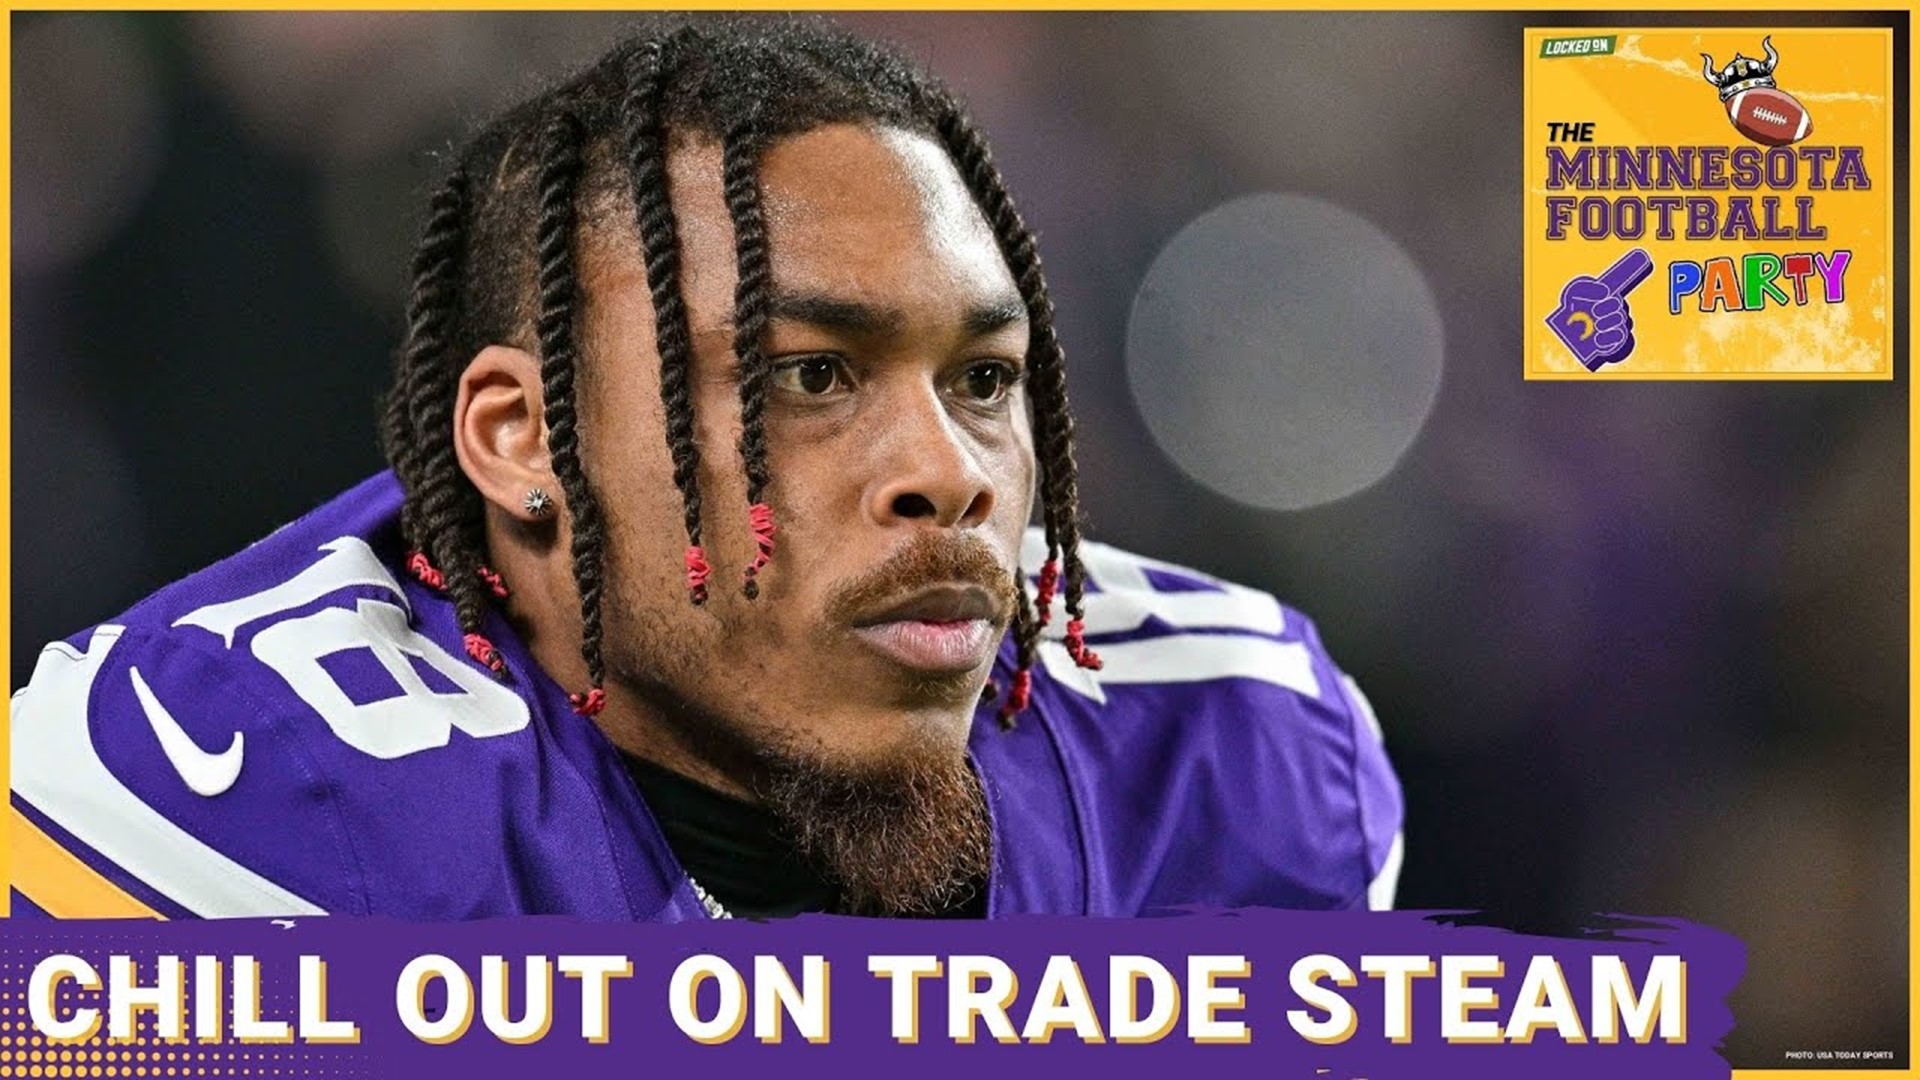 DO NOT PANIC About the Justin Jefferson Trade "Steam" - The Minnesota Football Party